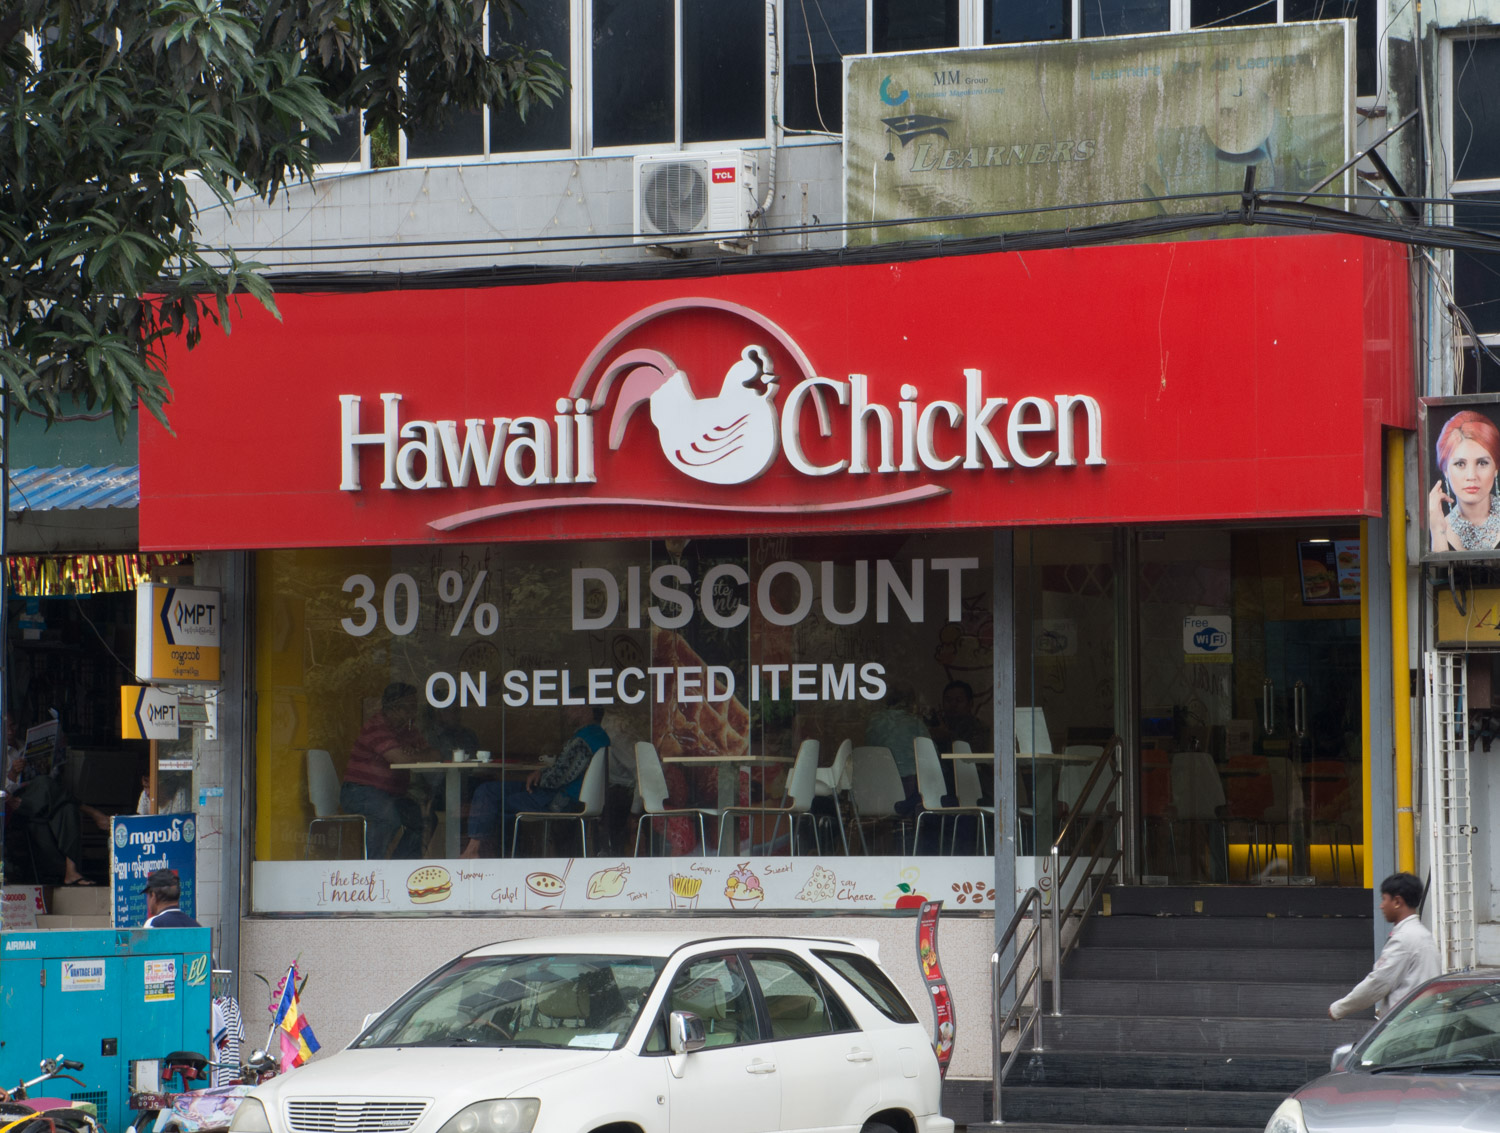 When Asian Fried Chicken isn't good enough (also, I find the whole concept of discount chicken somewhat disquieting).